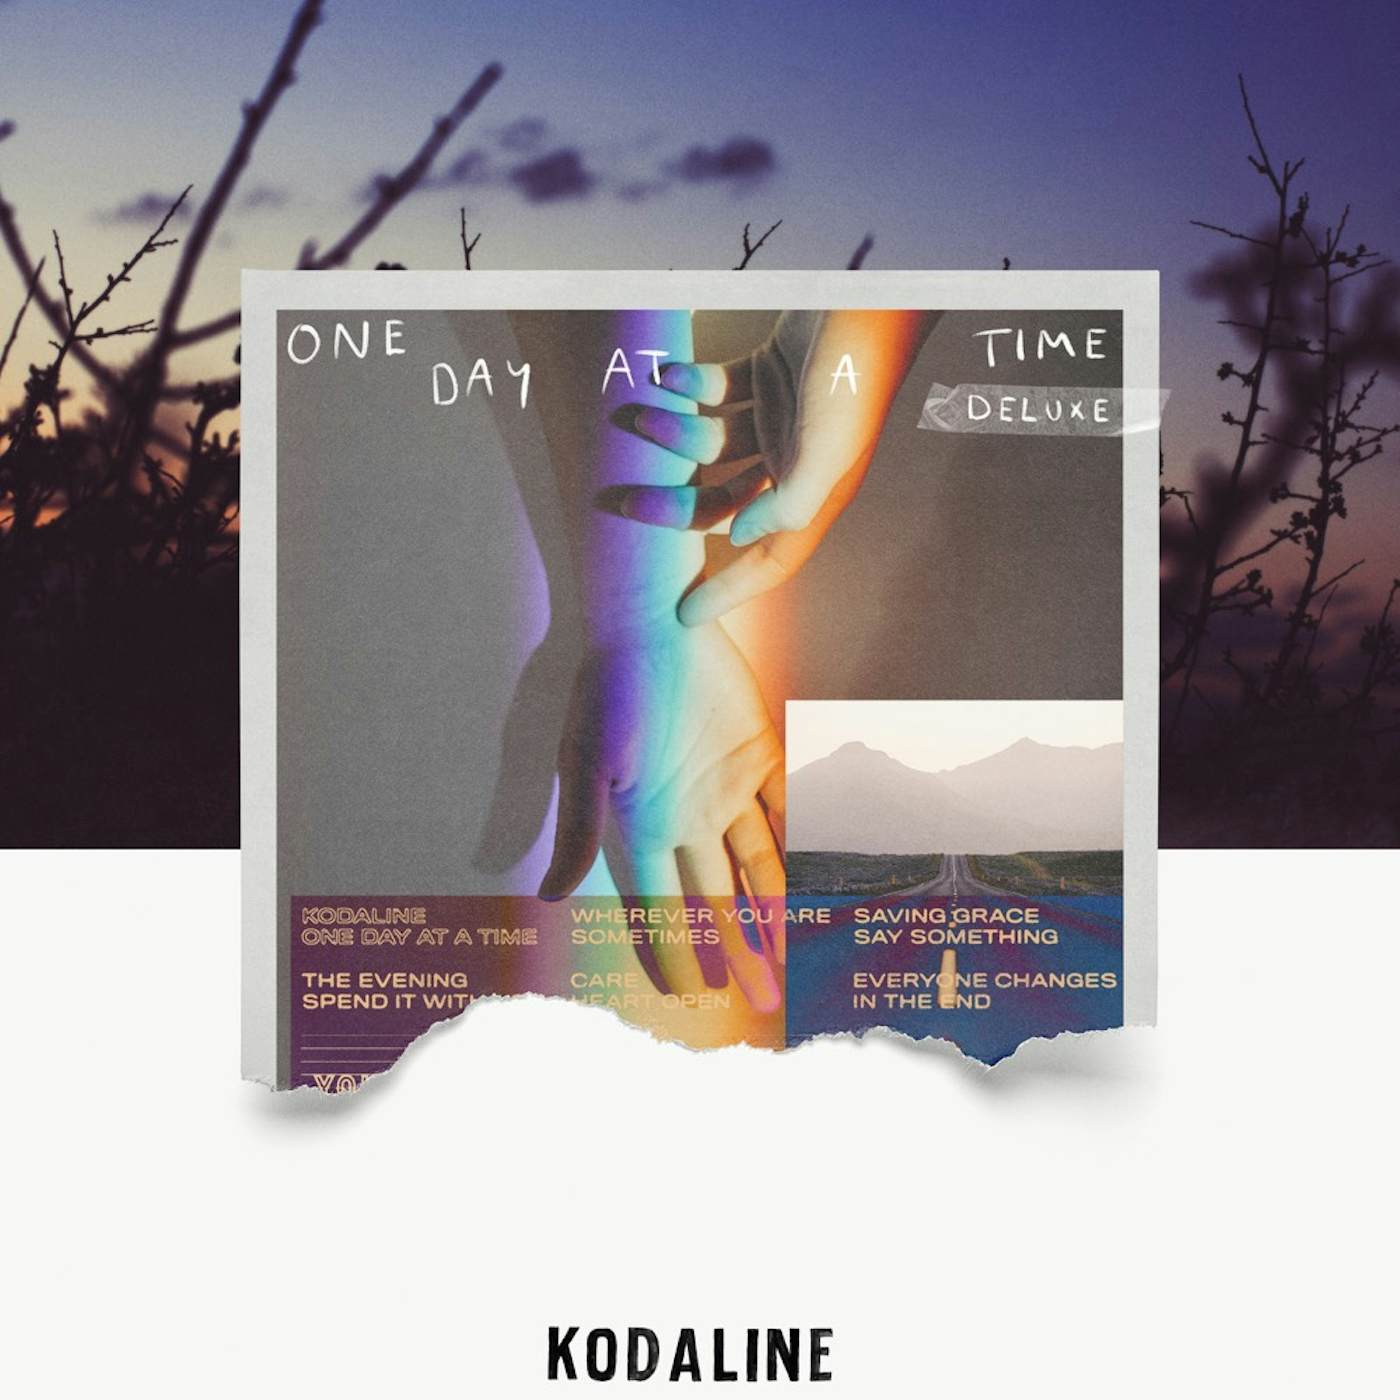 Kodaline One Day At A Time (Deluxe) Vinyl Record